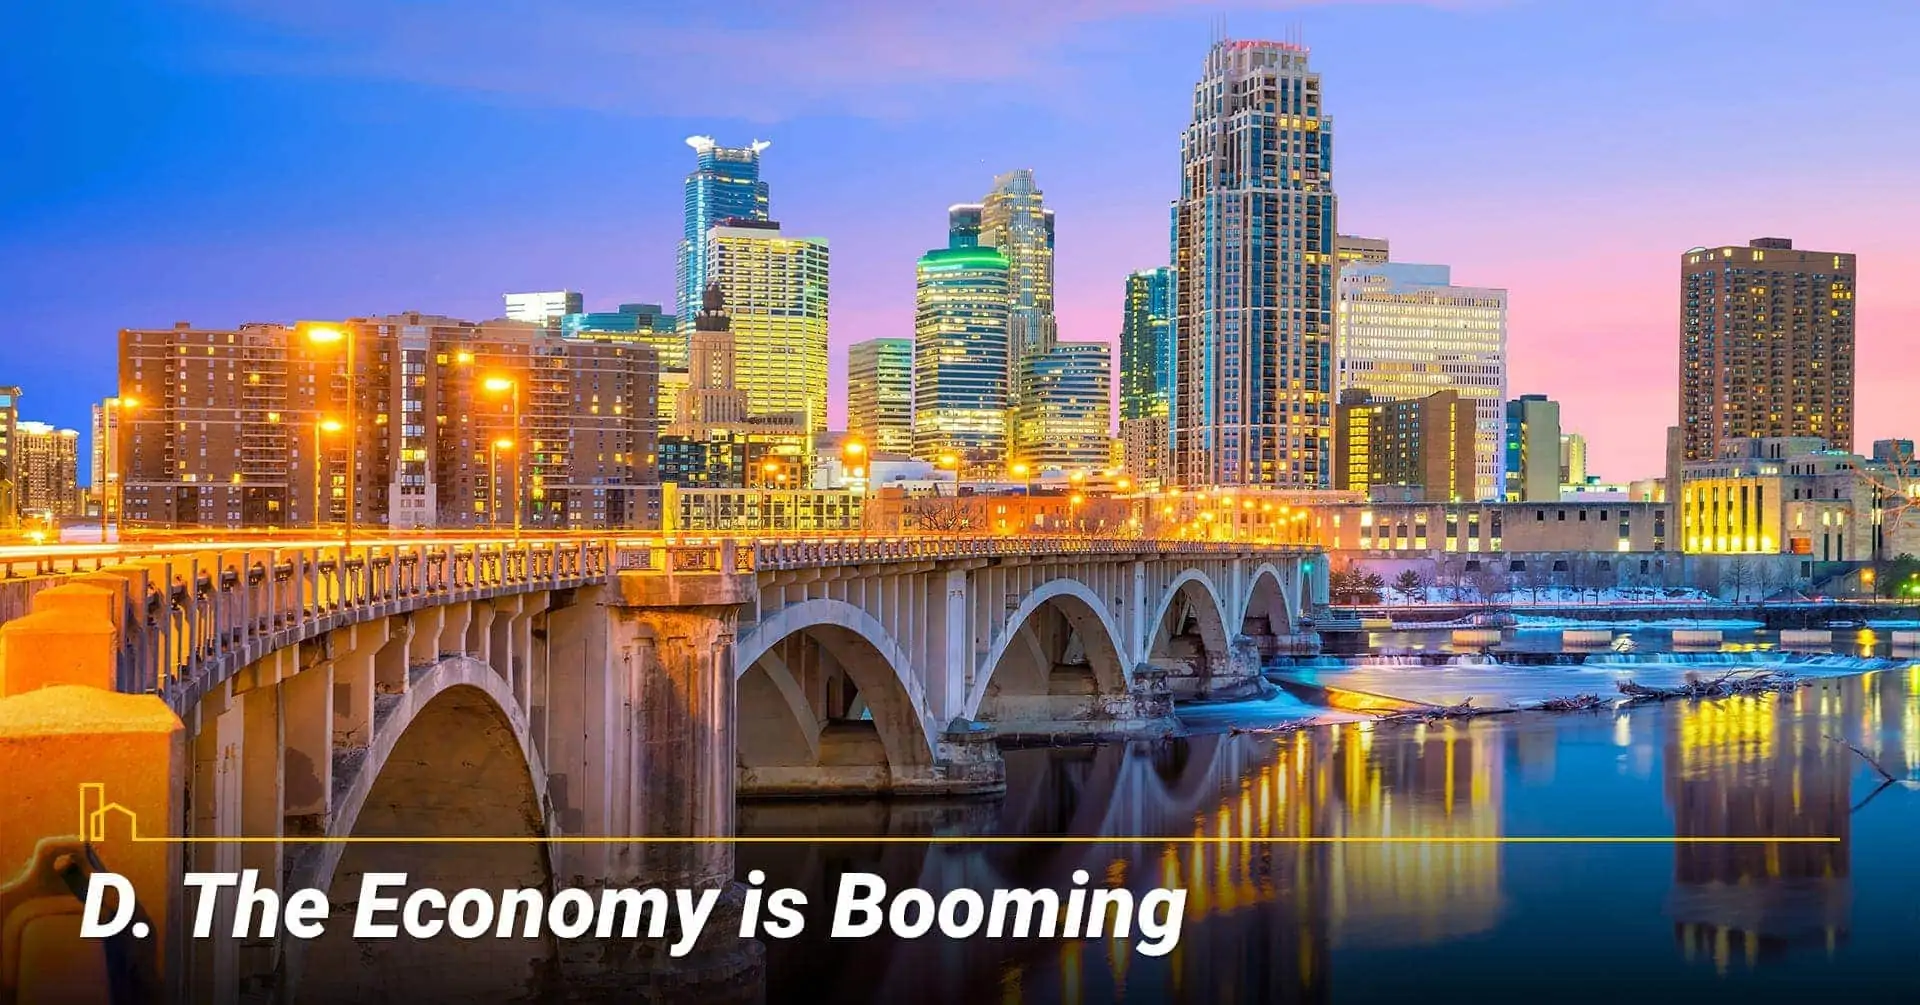 The Economy is Booming, strong economy